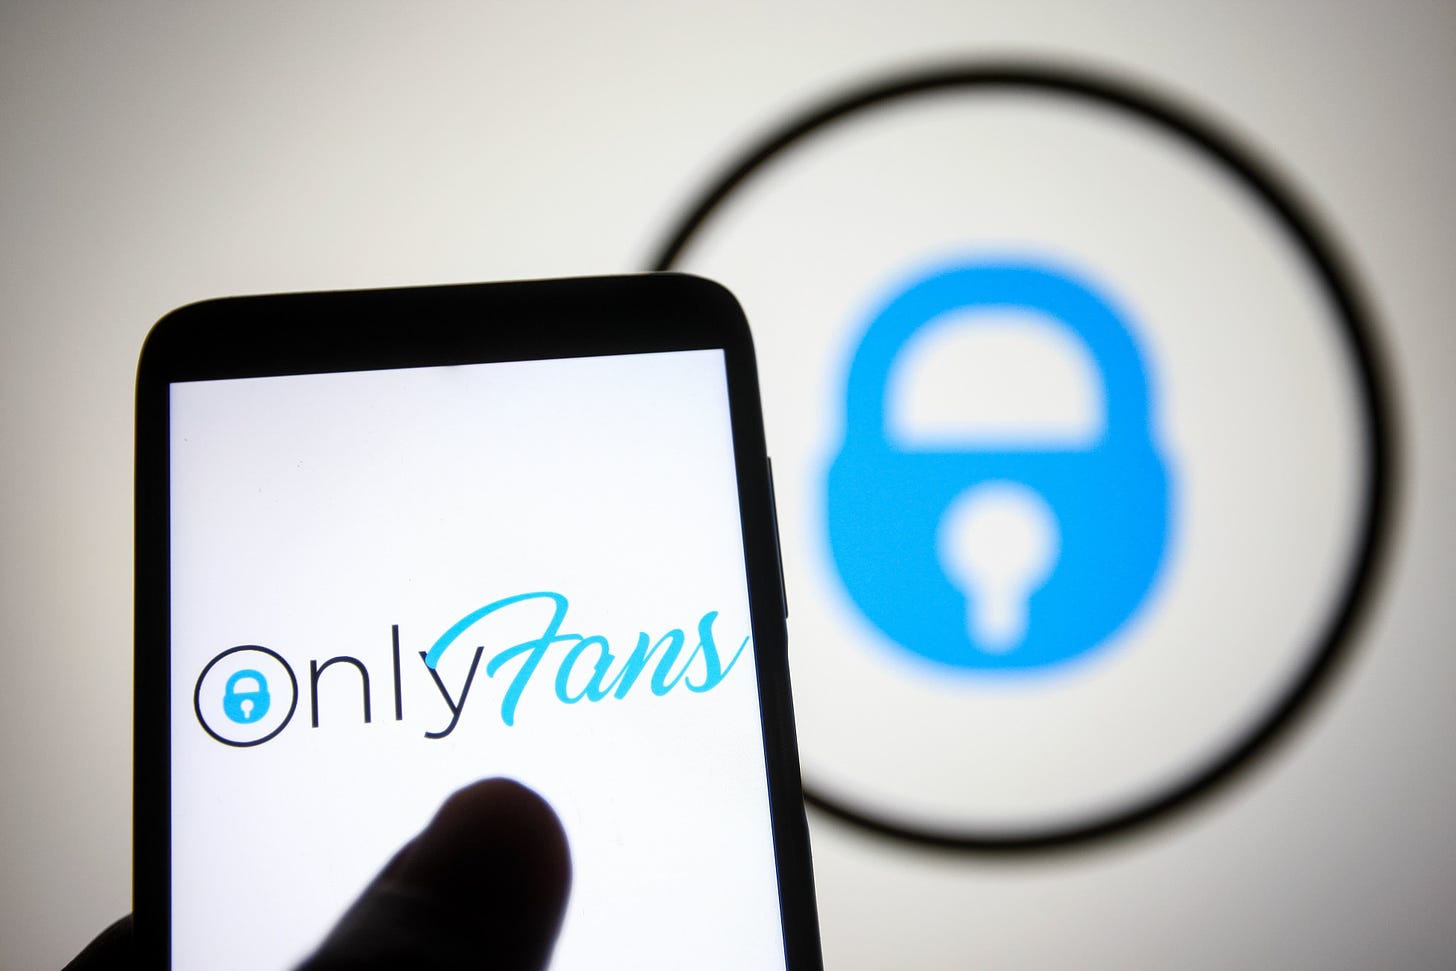 OnlyFans reverses porn ban after backlash from users